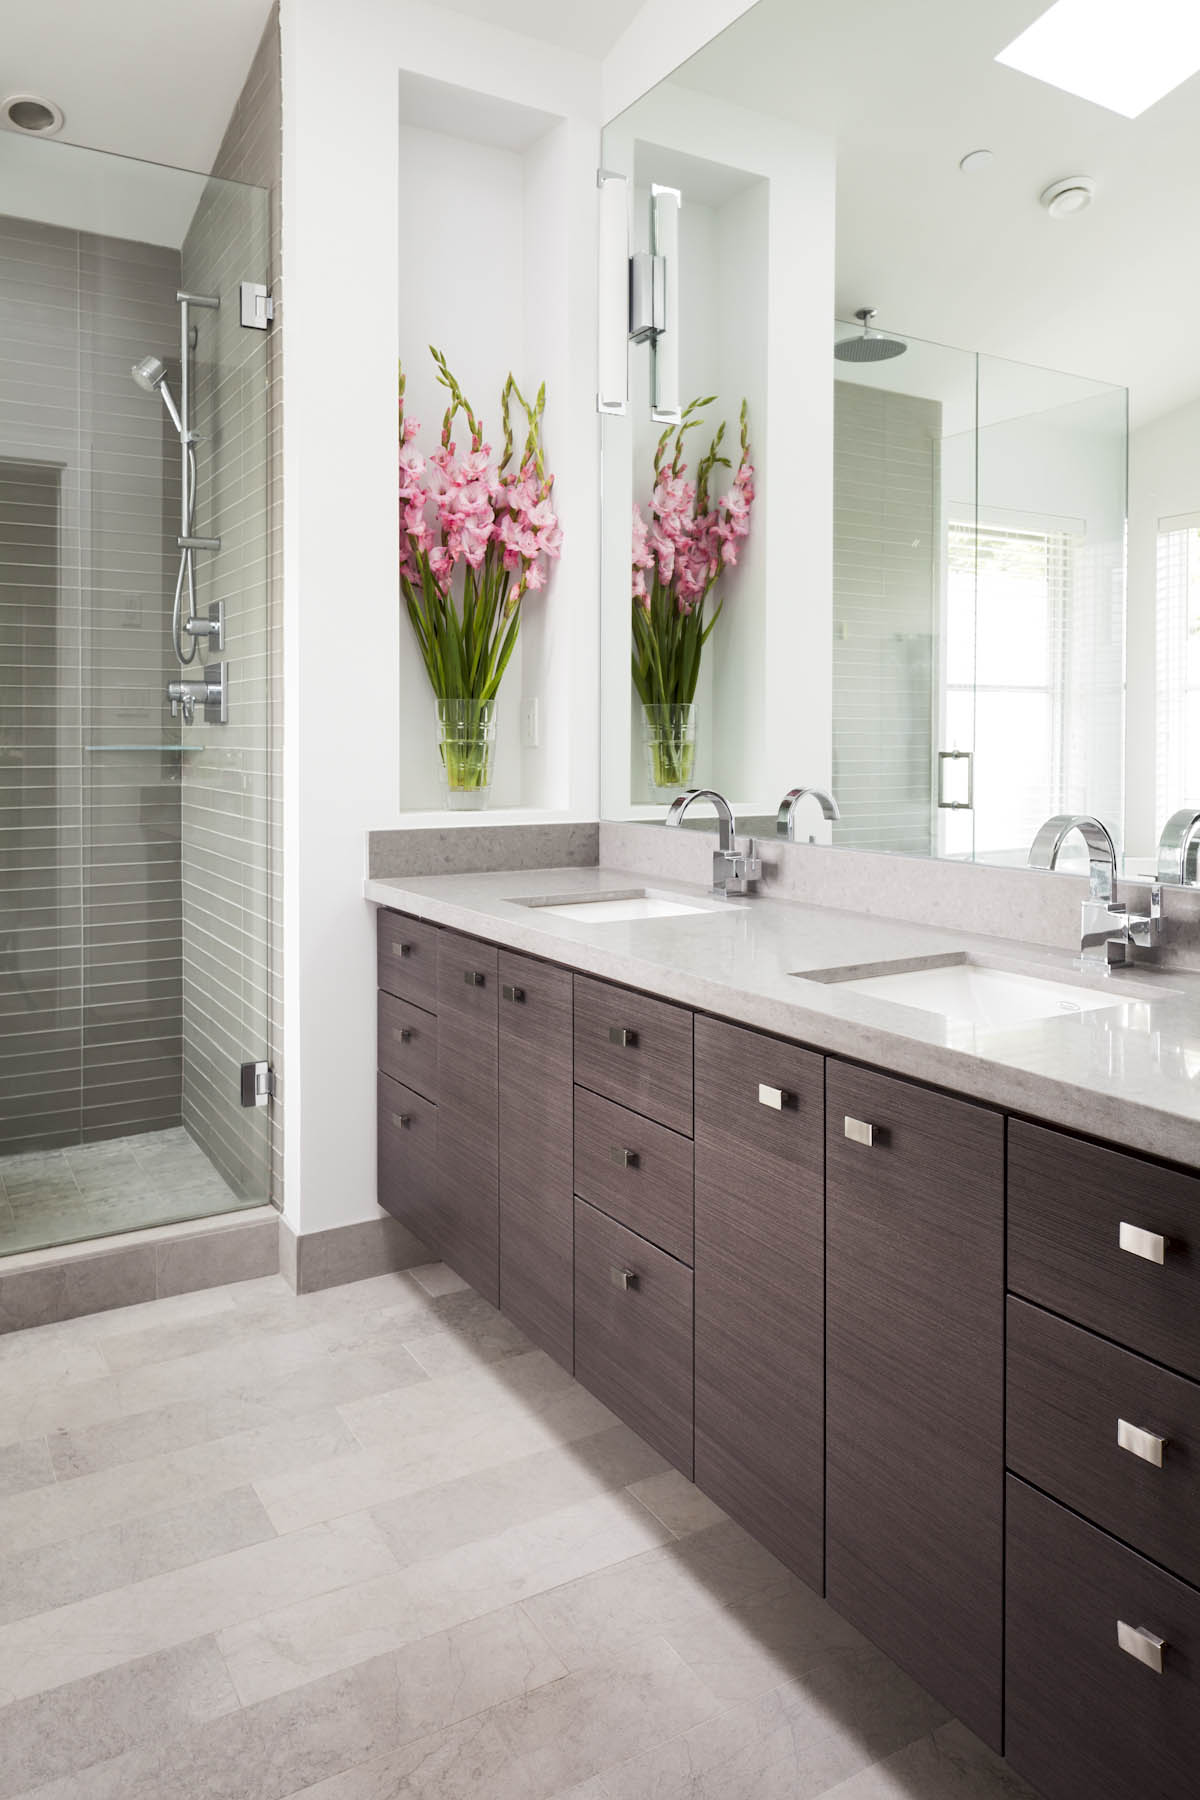 Spacious, modern bathroom design at the West Vancouver custom home.